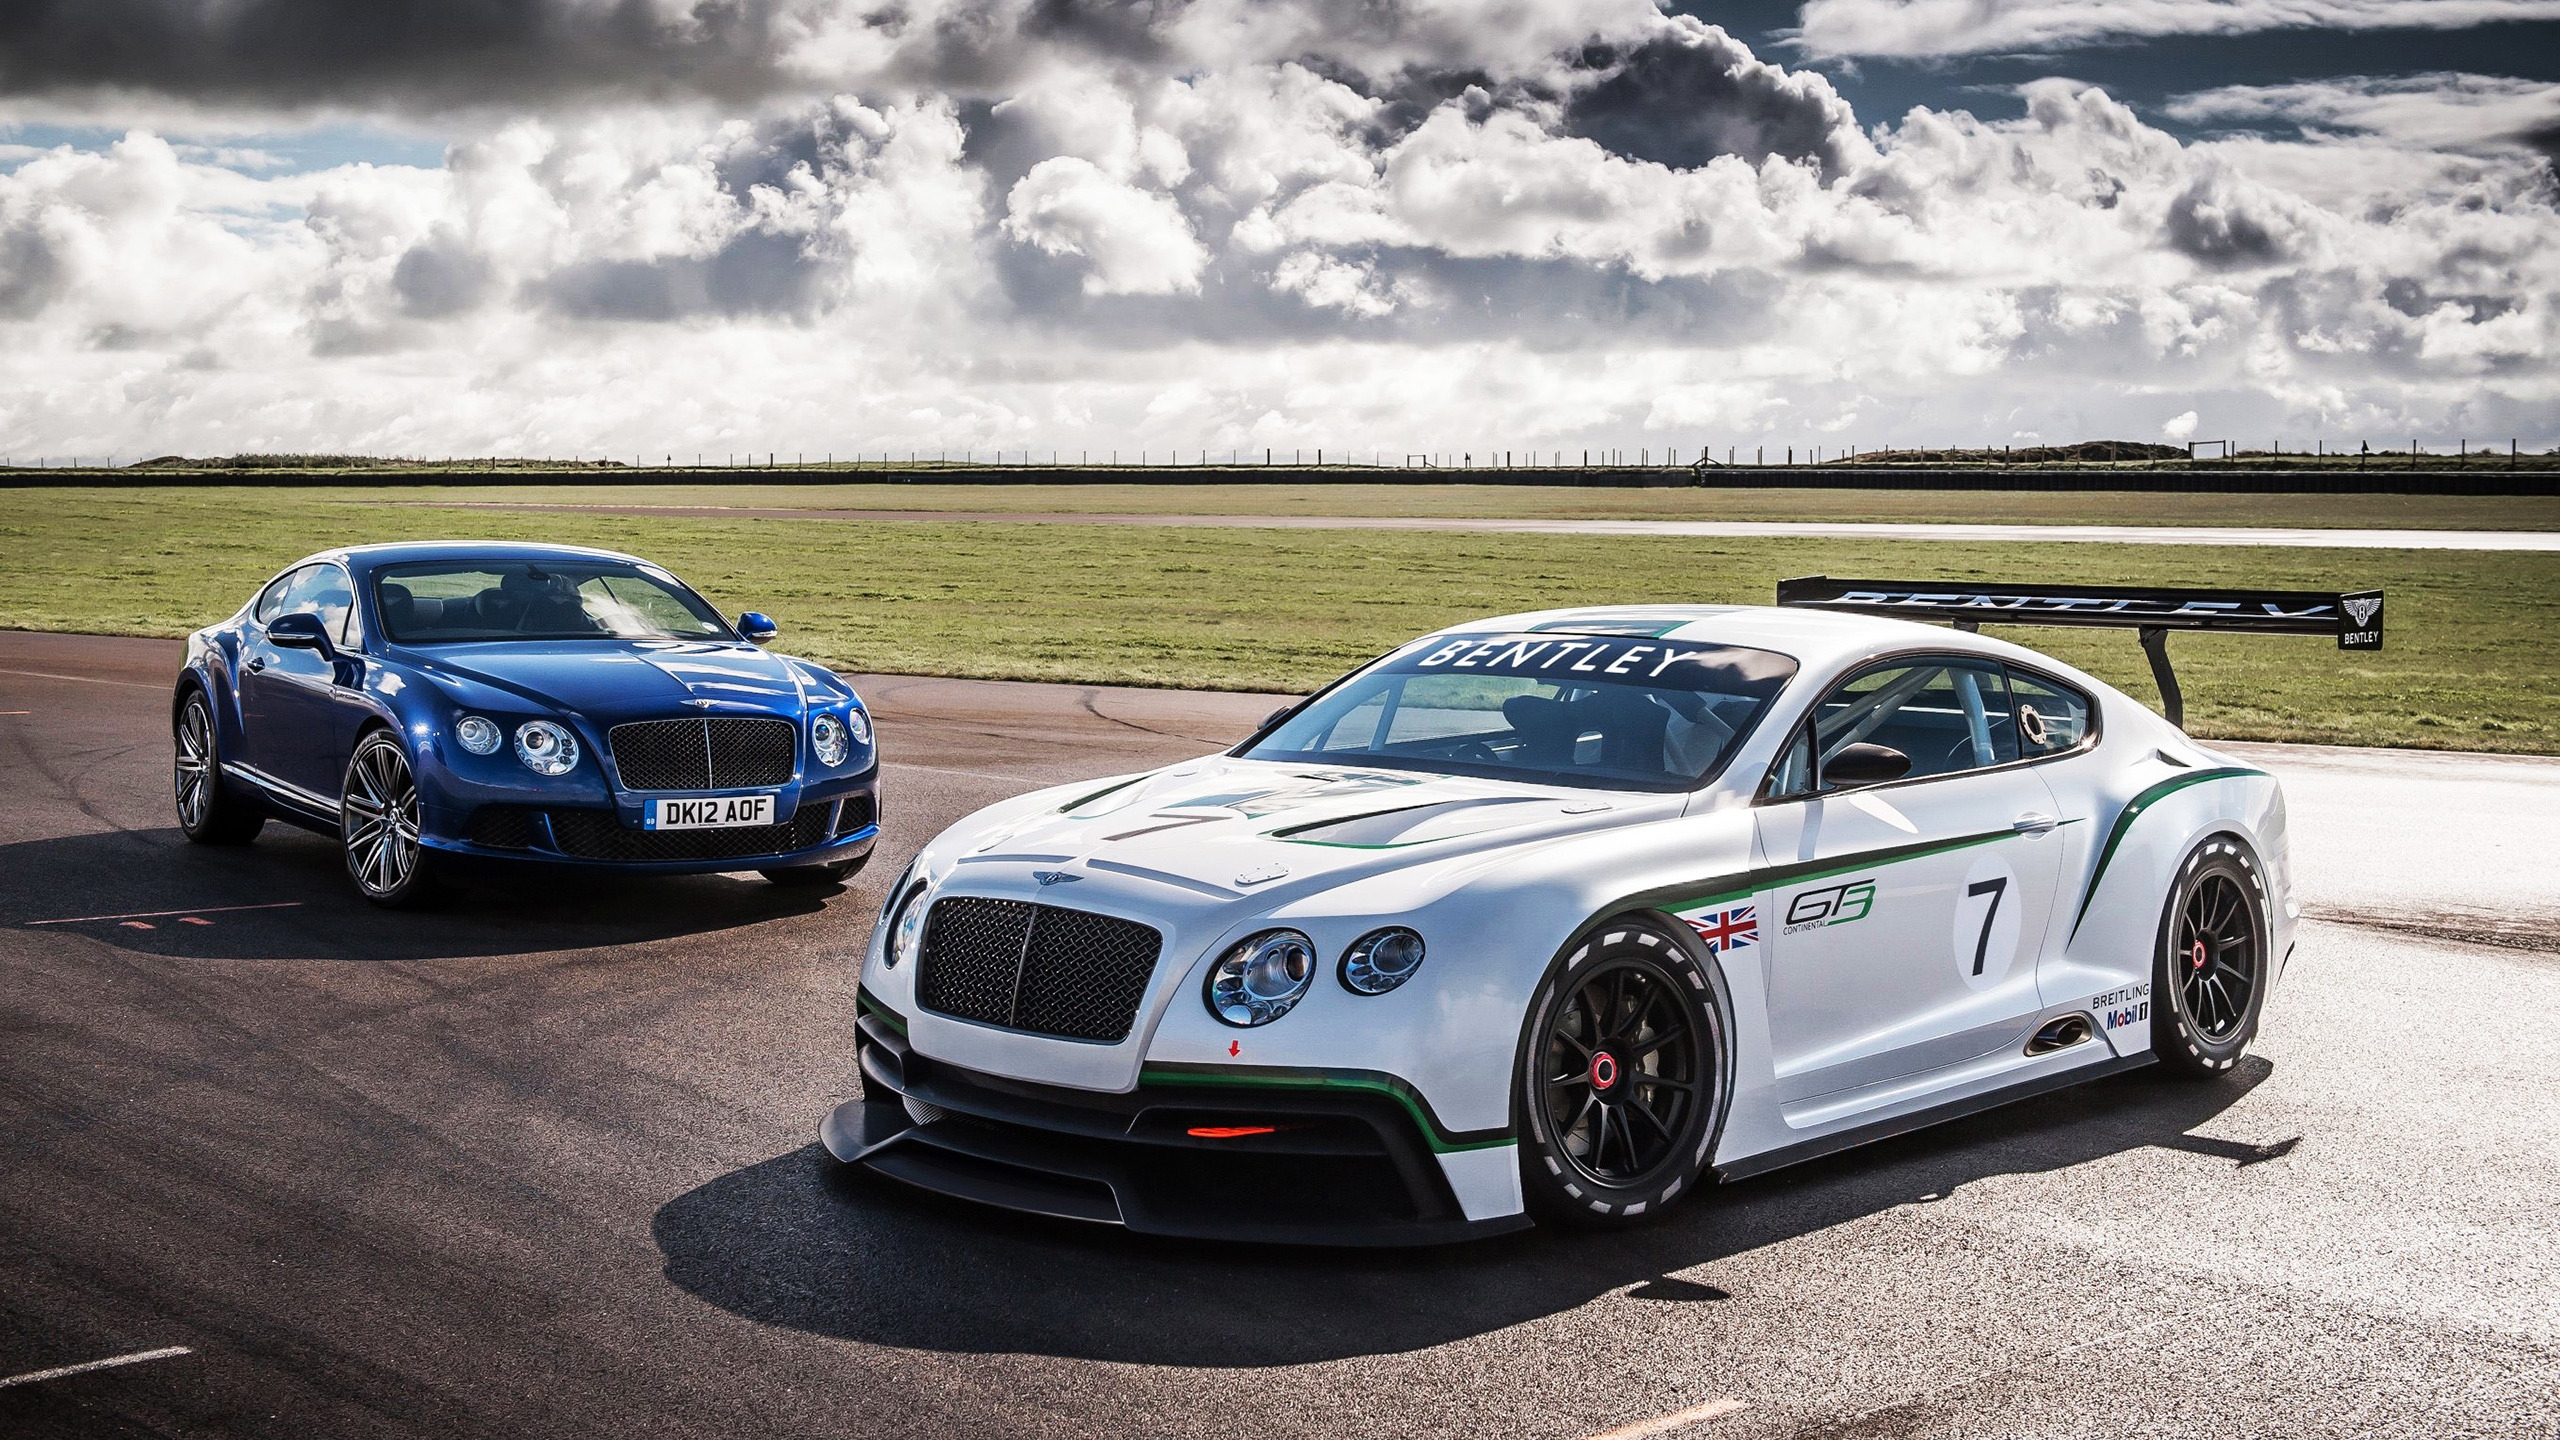 Bentley Continental GT3 Racer for 2560x1440 HDTV resolution